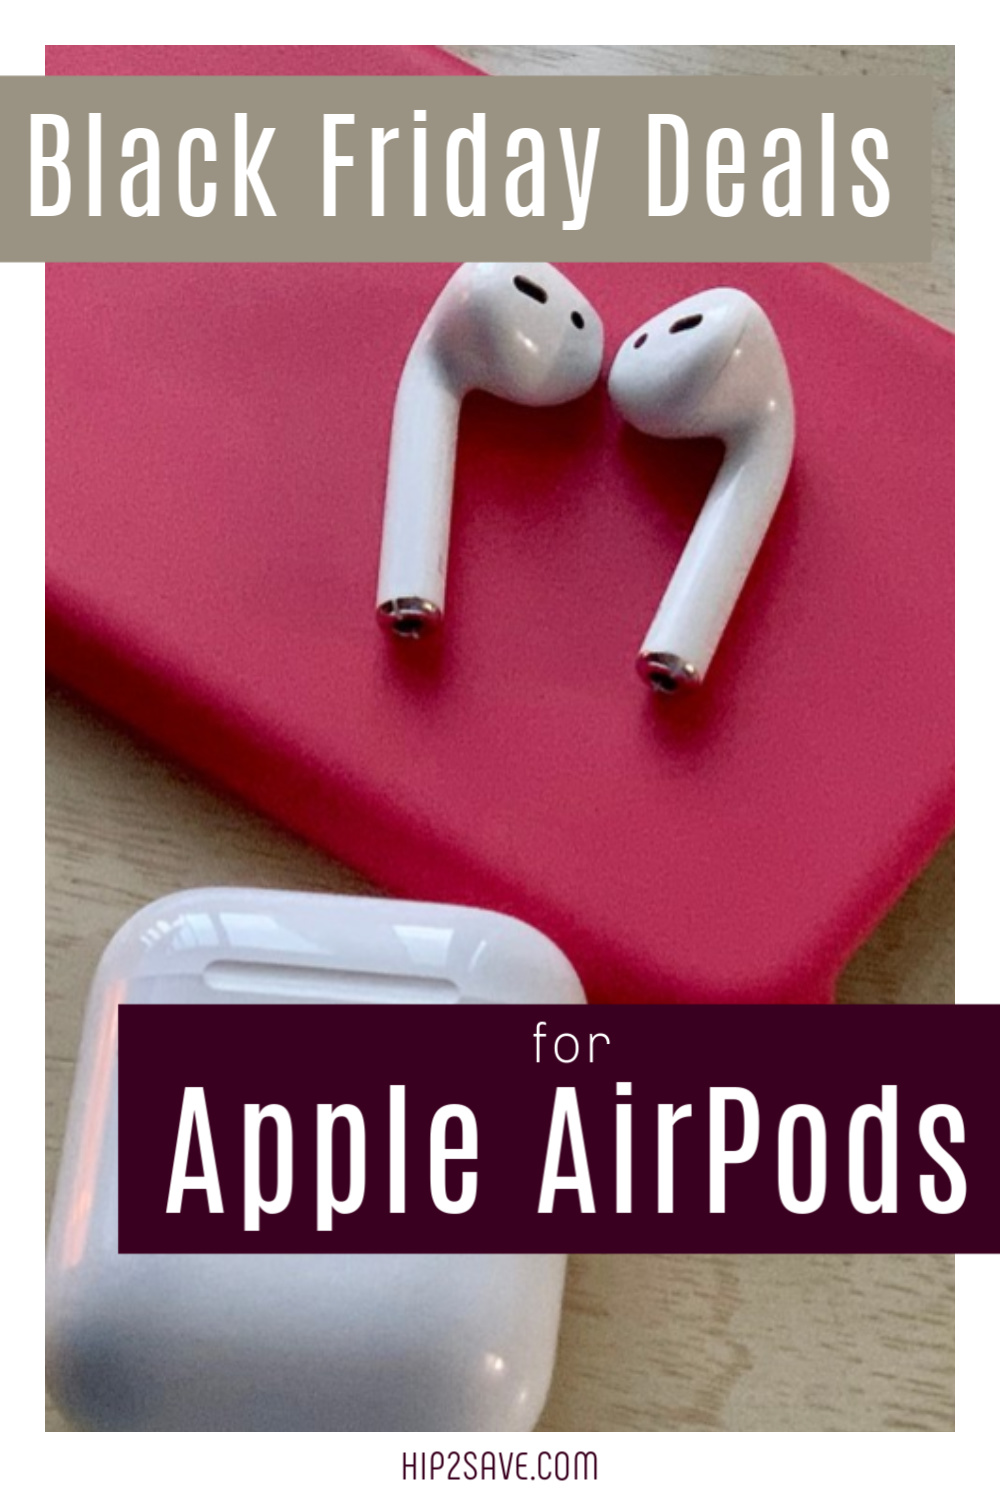 Best Apple AirPods Black Friday 2019 Sales | Official Hip2Save